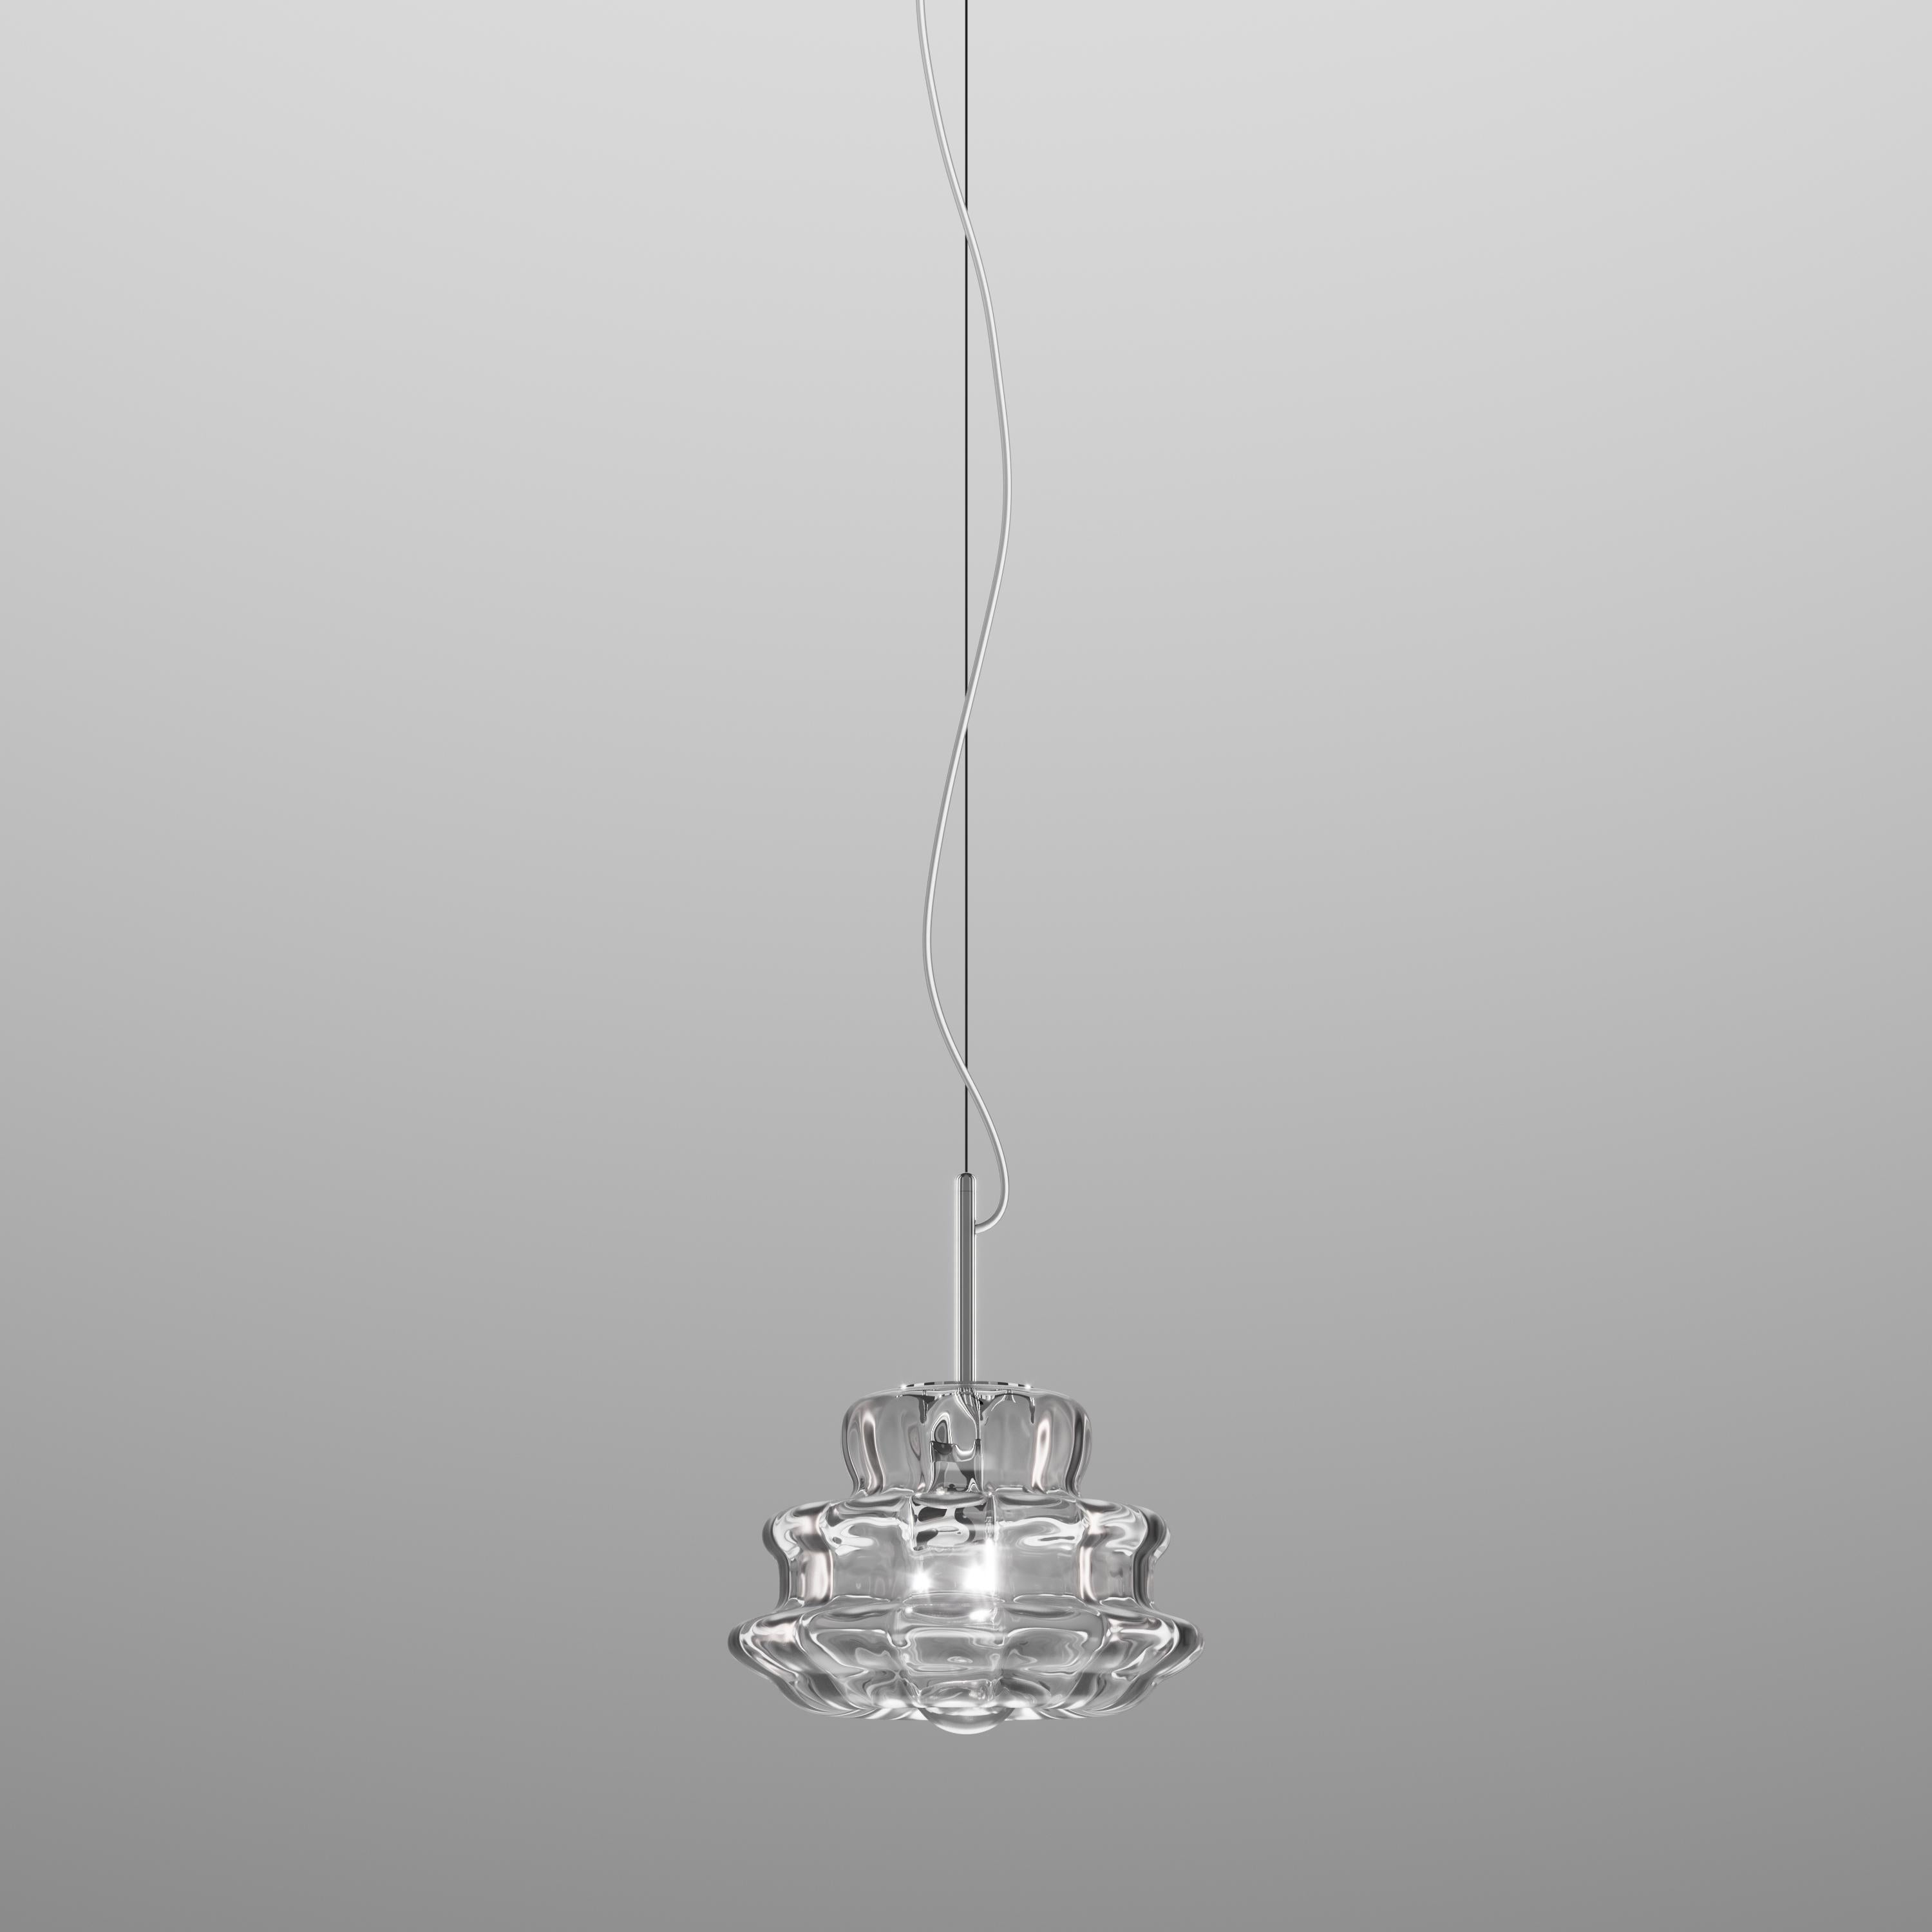 The shape of this collection stems from the desire to reinterpret the traditional Murano chandelier. The choice of the crystal or white rigadin glass finish was the master’s touch: its radial stripes evoke the arms of the historic candlestick while